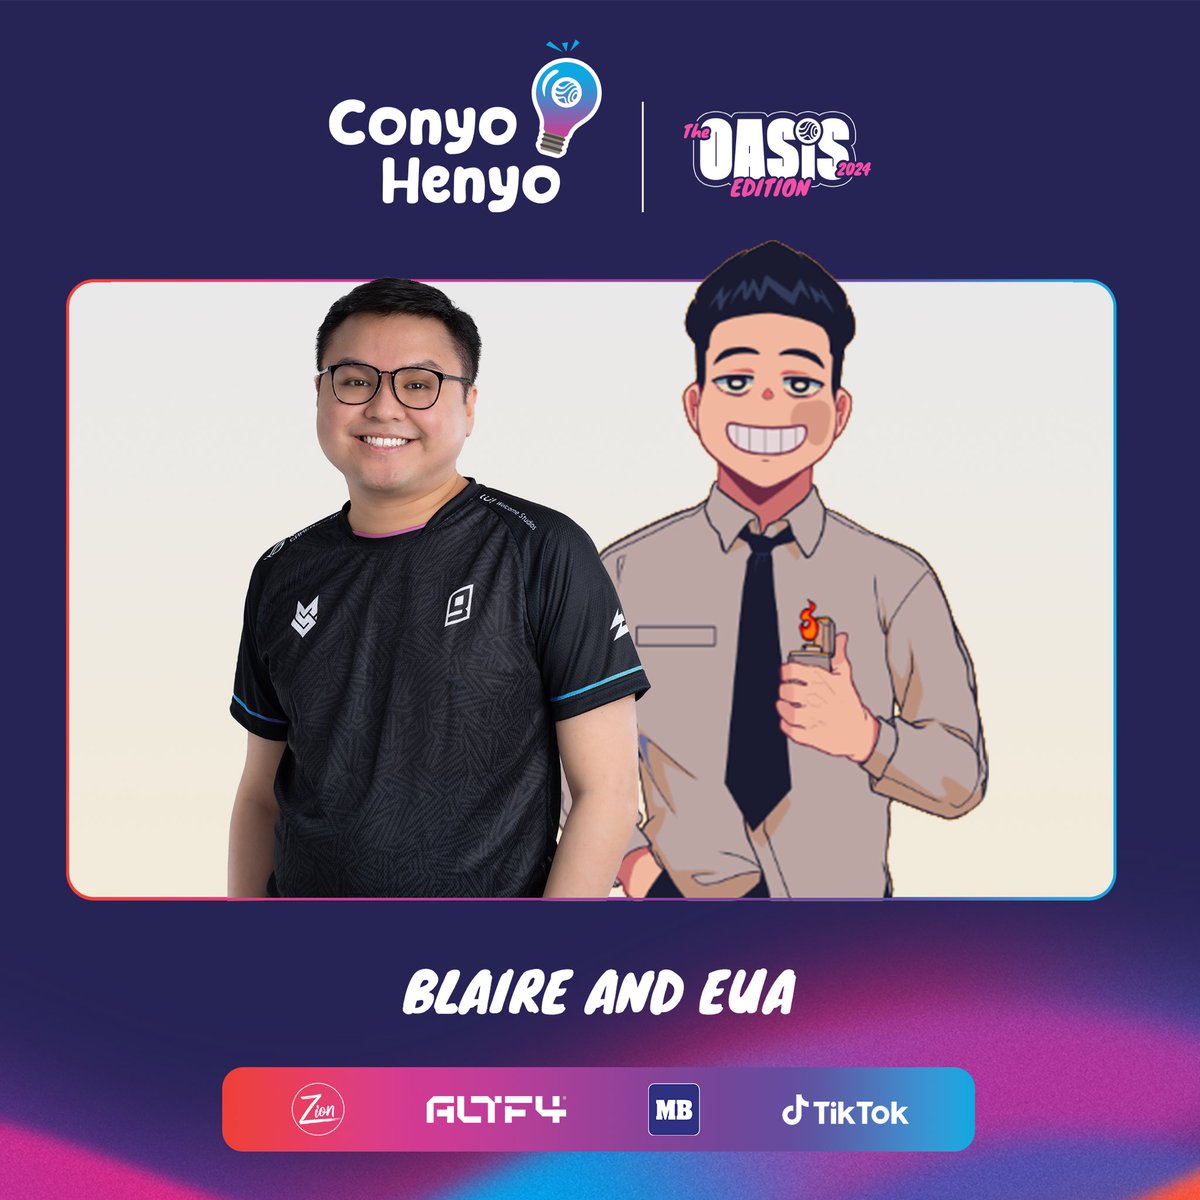 Last na talaga to, last na talaga to duuuuude Introducing our final duo that will like make hula the words sa Conyo Henyo, @PlayWithBlaire and Eua! Catch them tomorrow on Conyo Henyo at 6PM! #ConyoHenyo #SinceDayOne